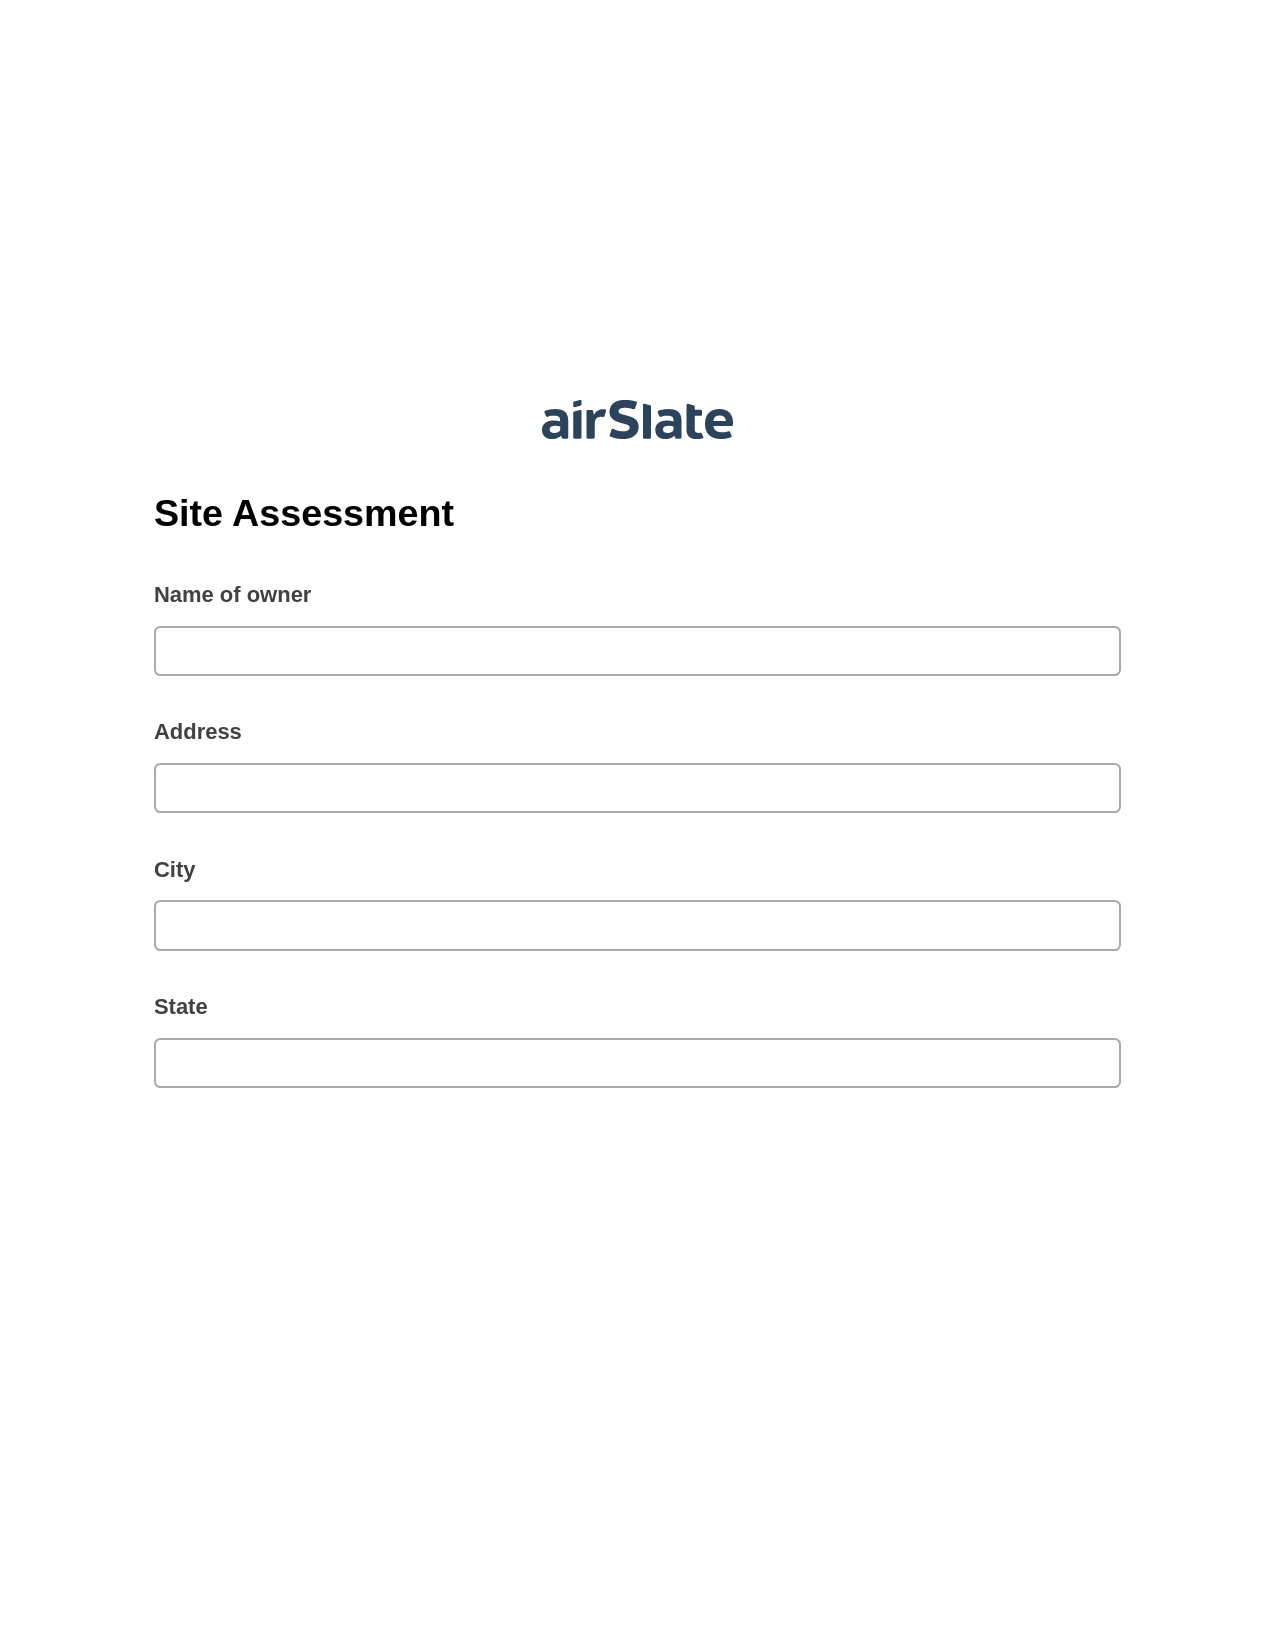 Multirole Site Assessment Pre-fill from CSV File Dropdown Options Bot, Create Slate Reminder Bot, Export to MySQL Bot